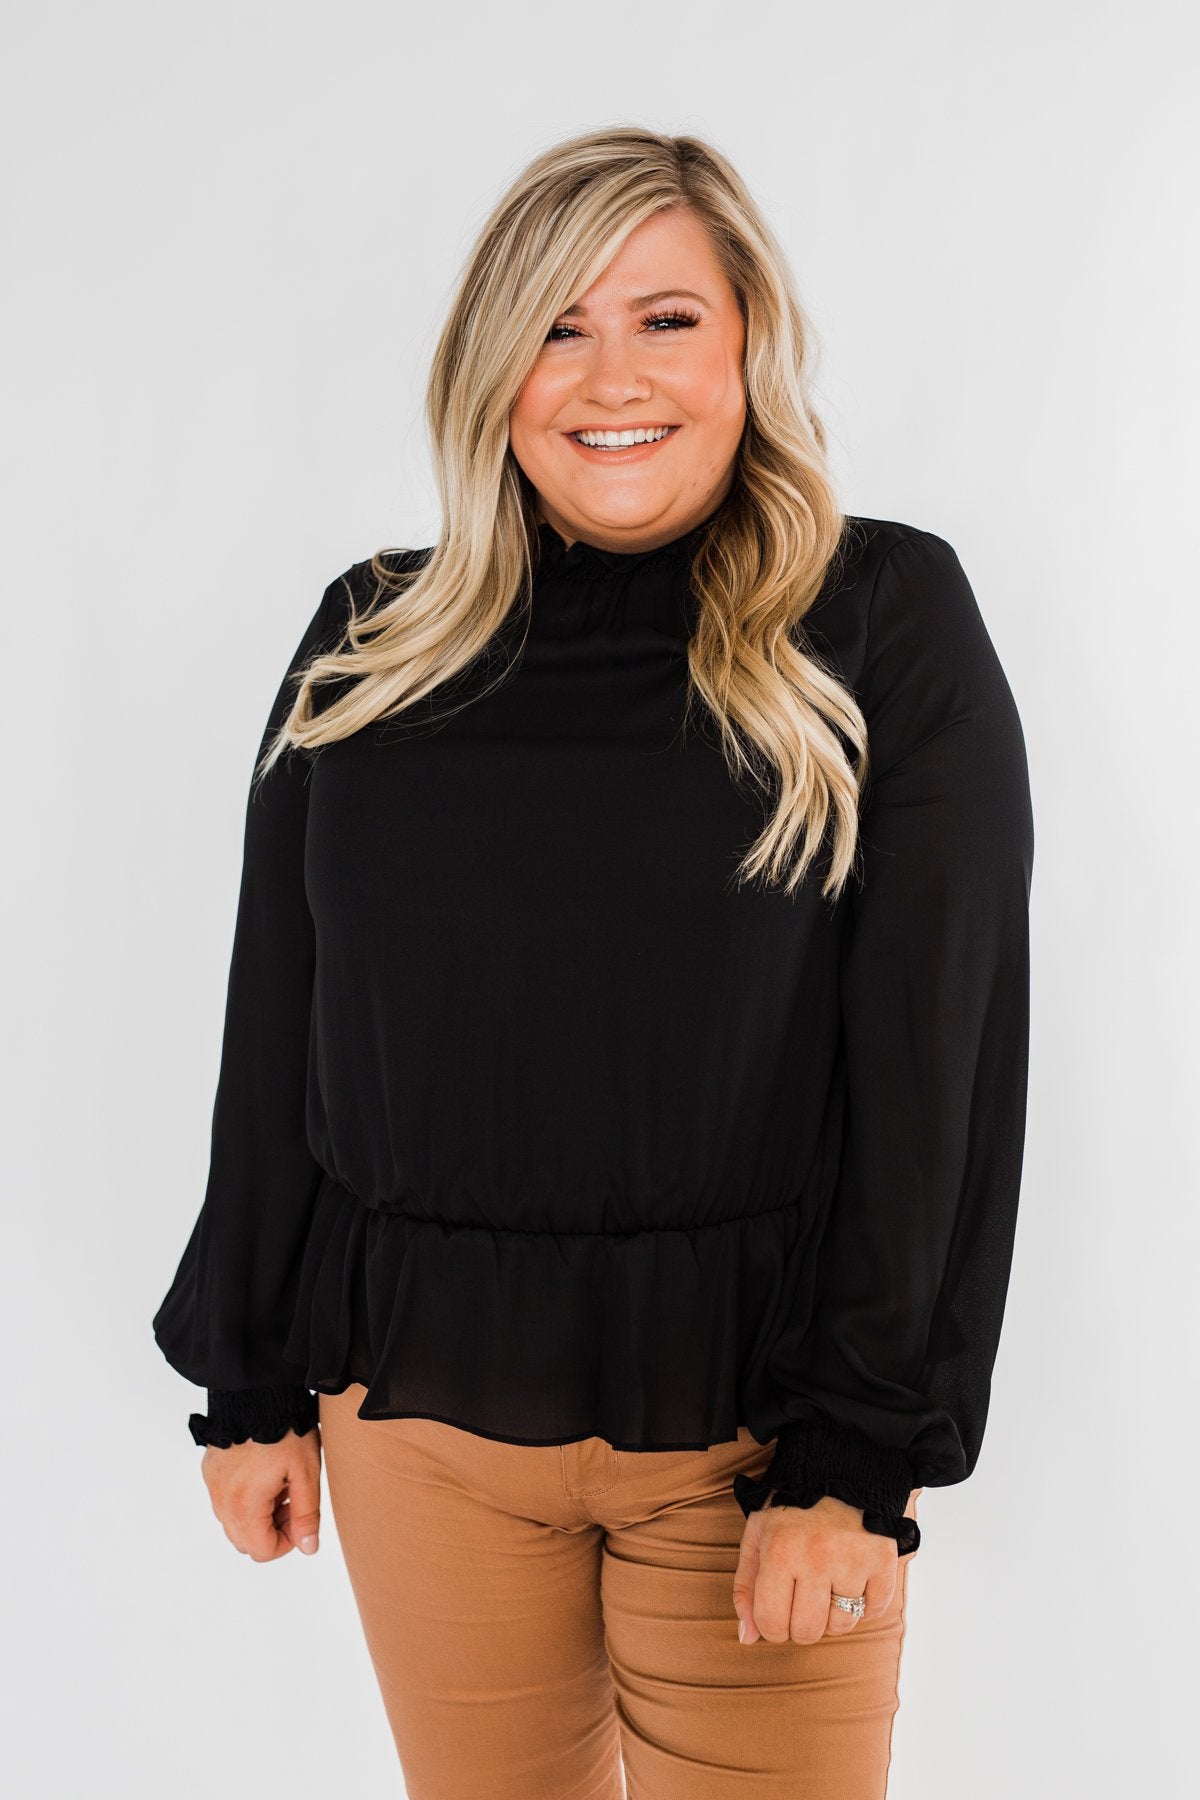 Say You Won't Let Go Cinched Blouse- Black